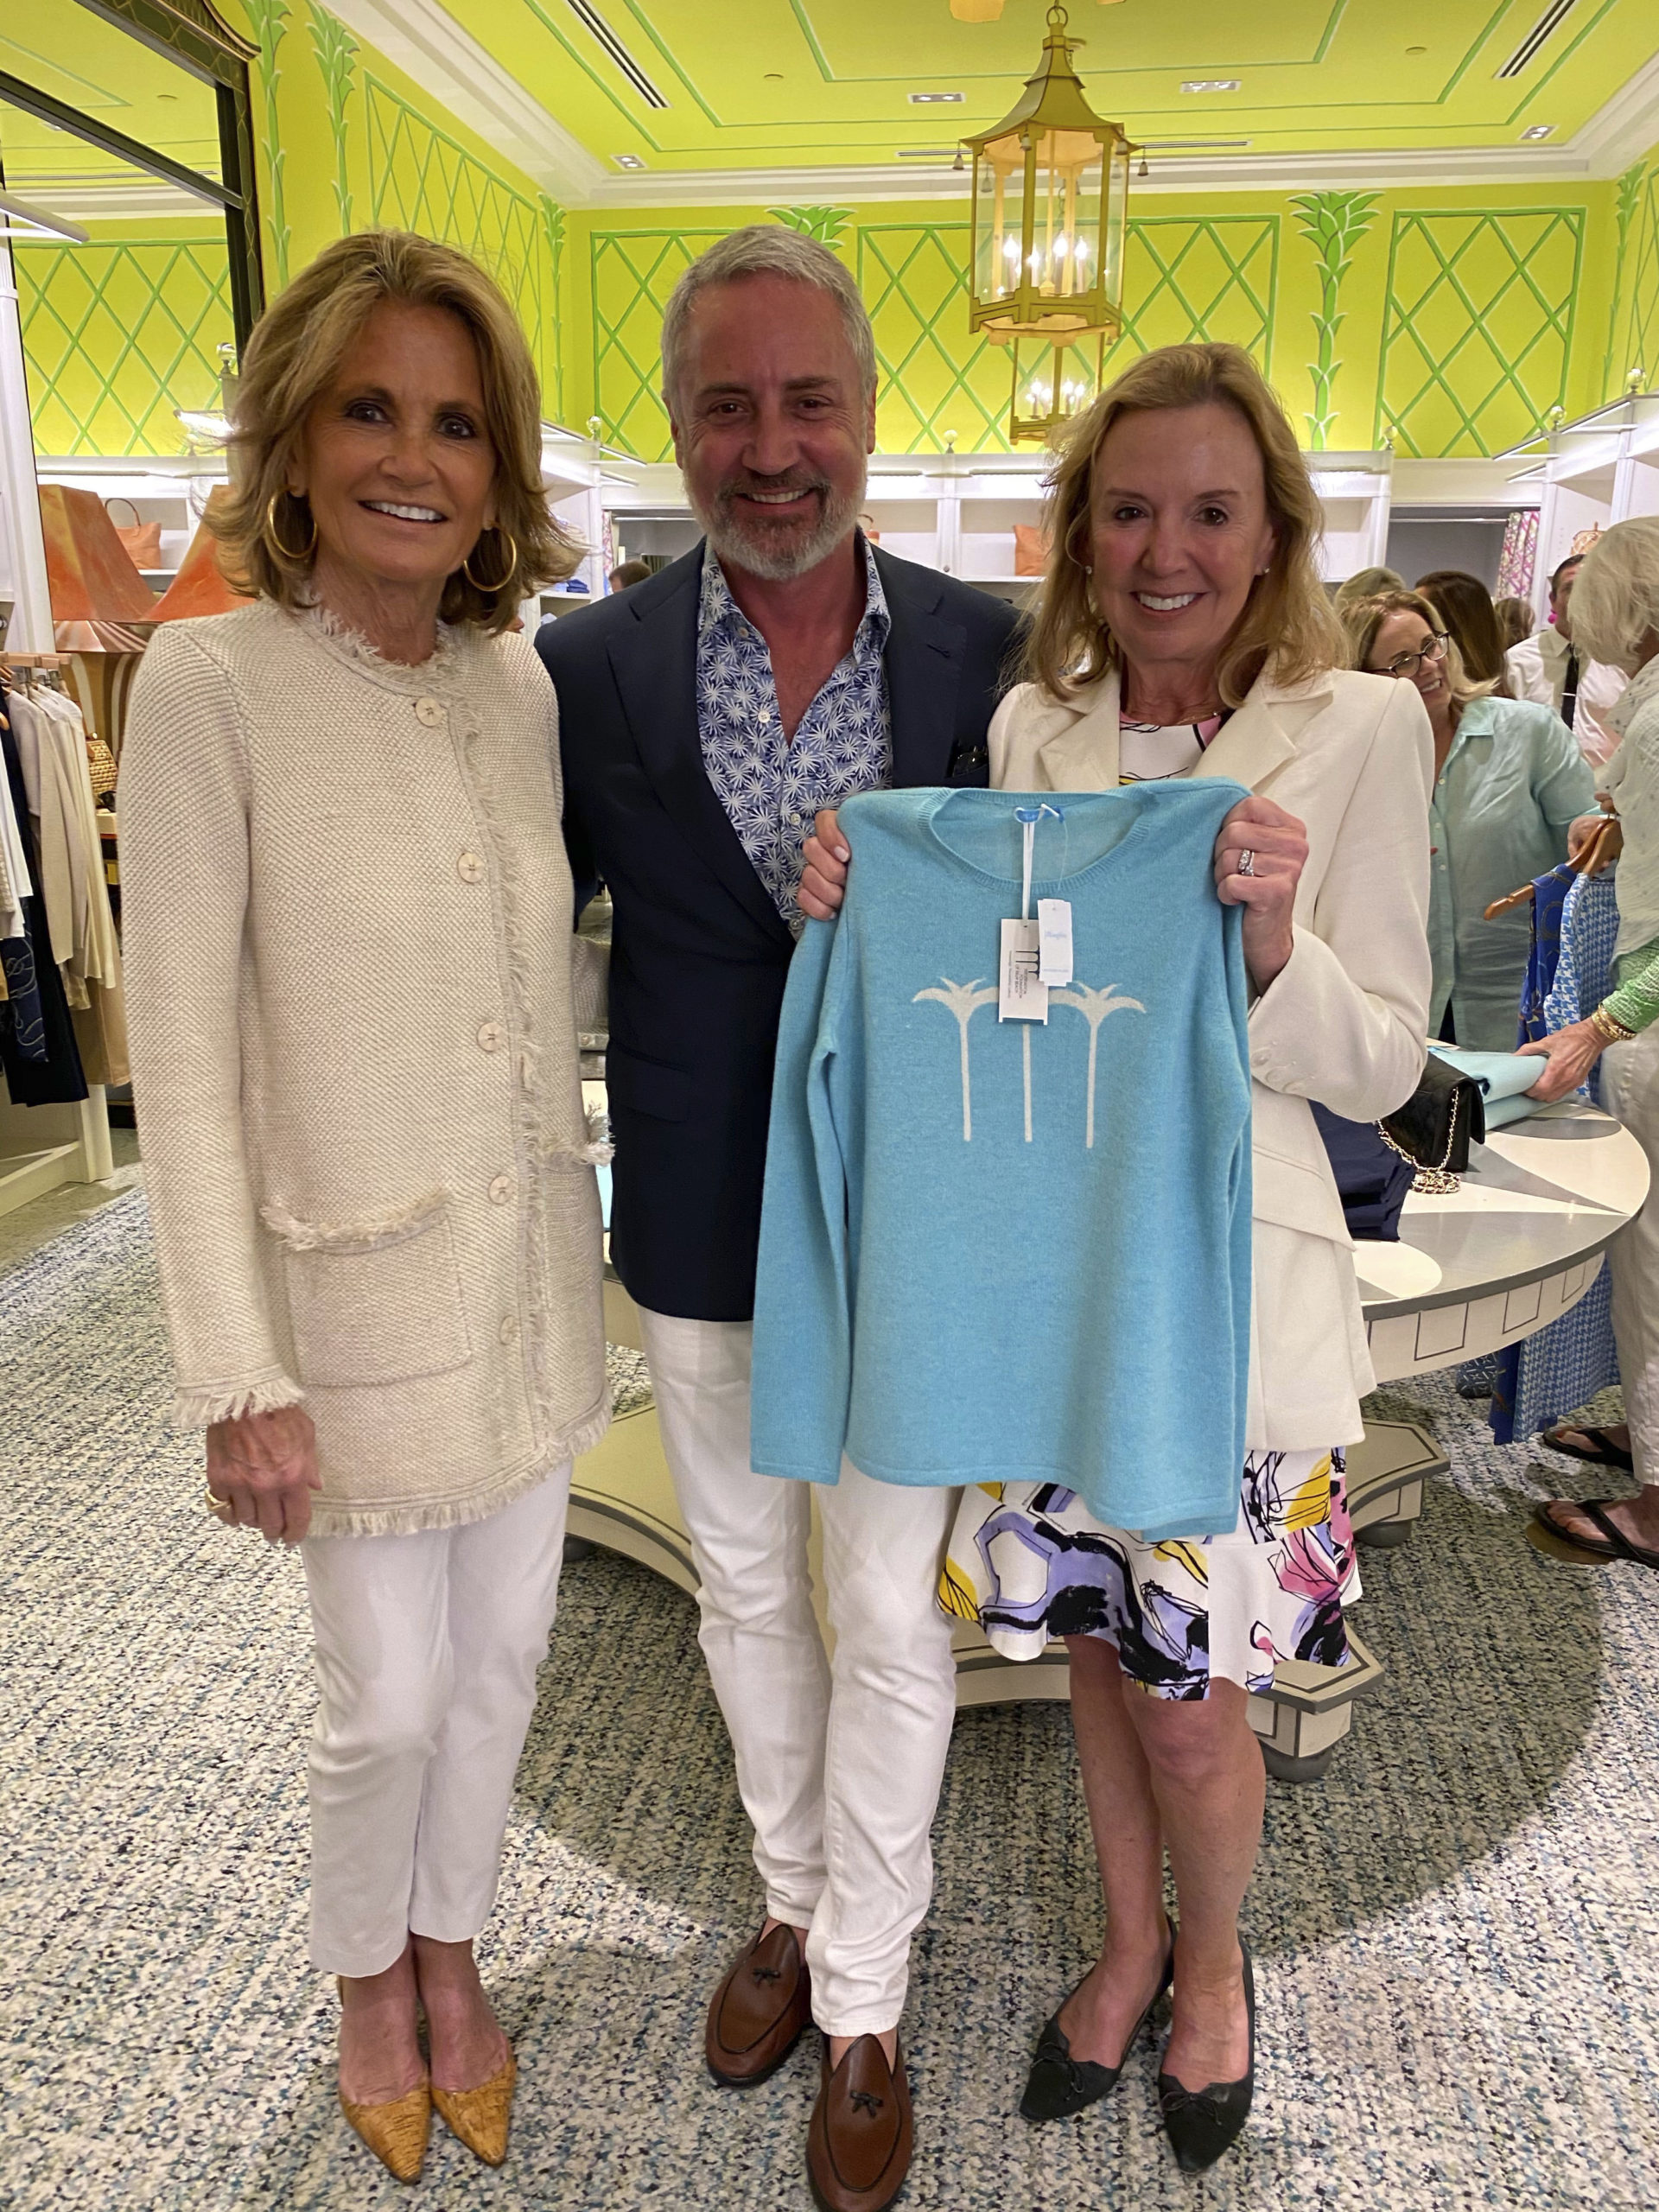 Grace Meigher, Jack Lynch and Susan Cowie at the J. McLaughlin store event.